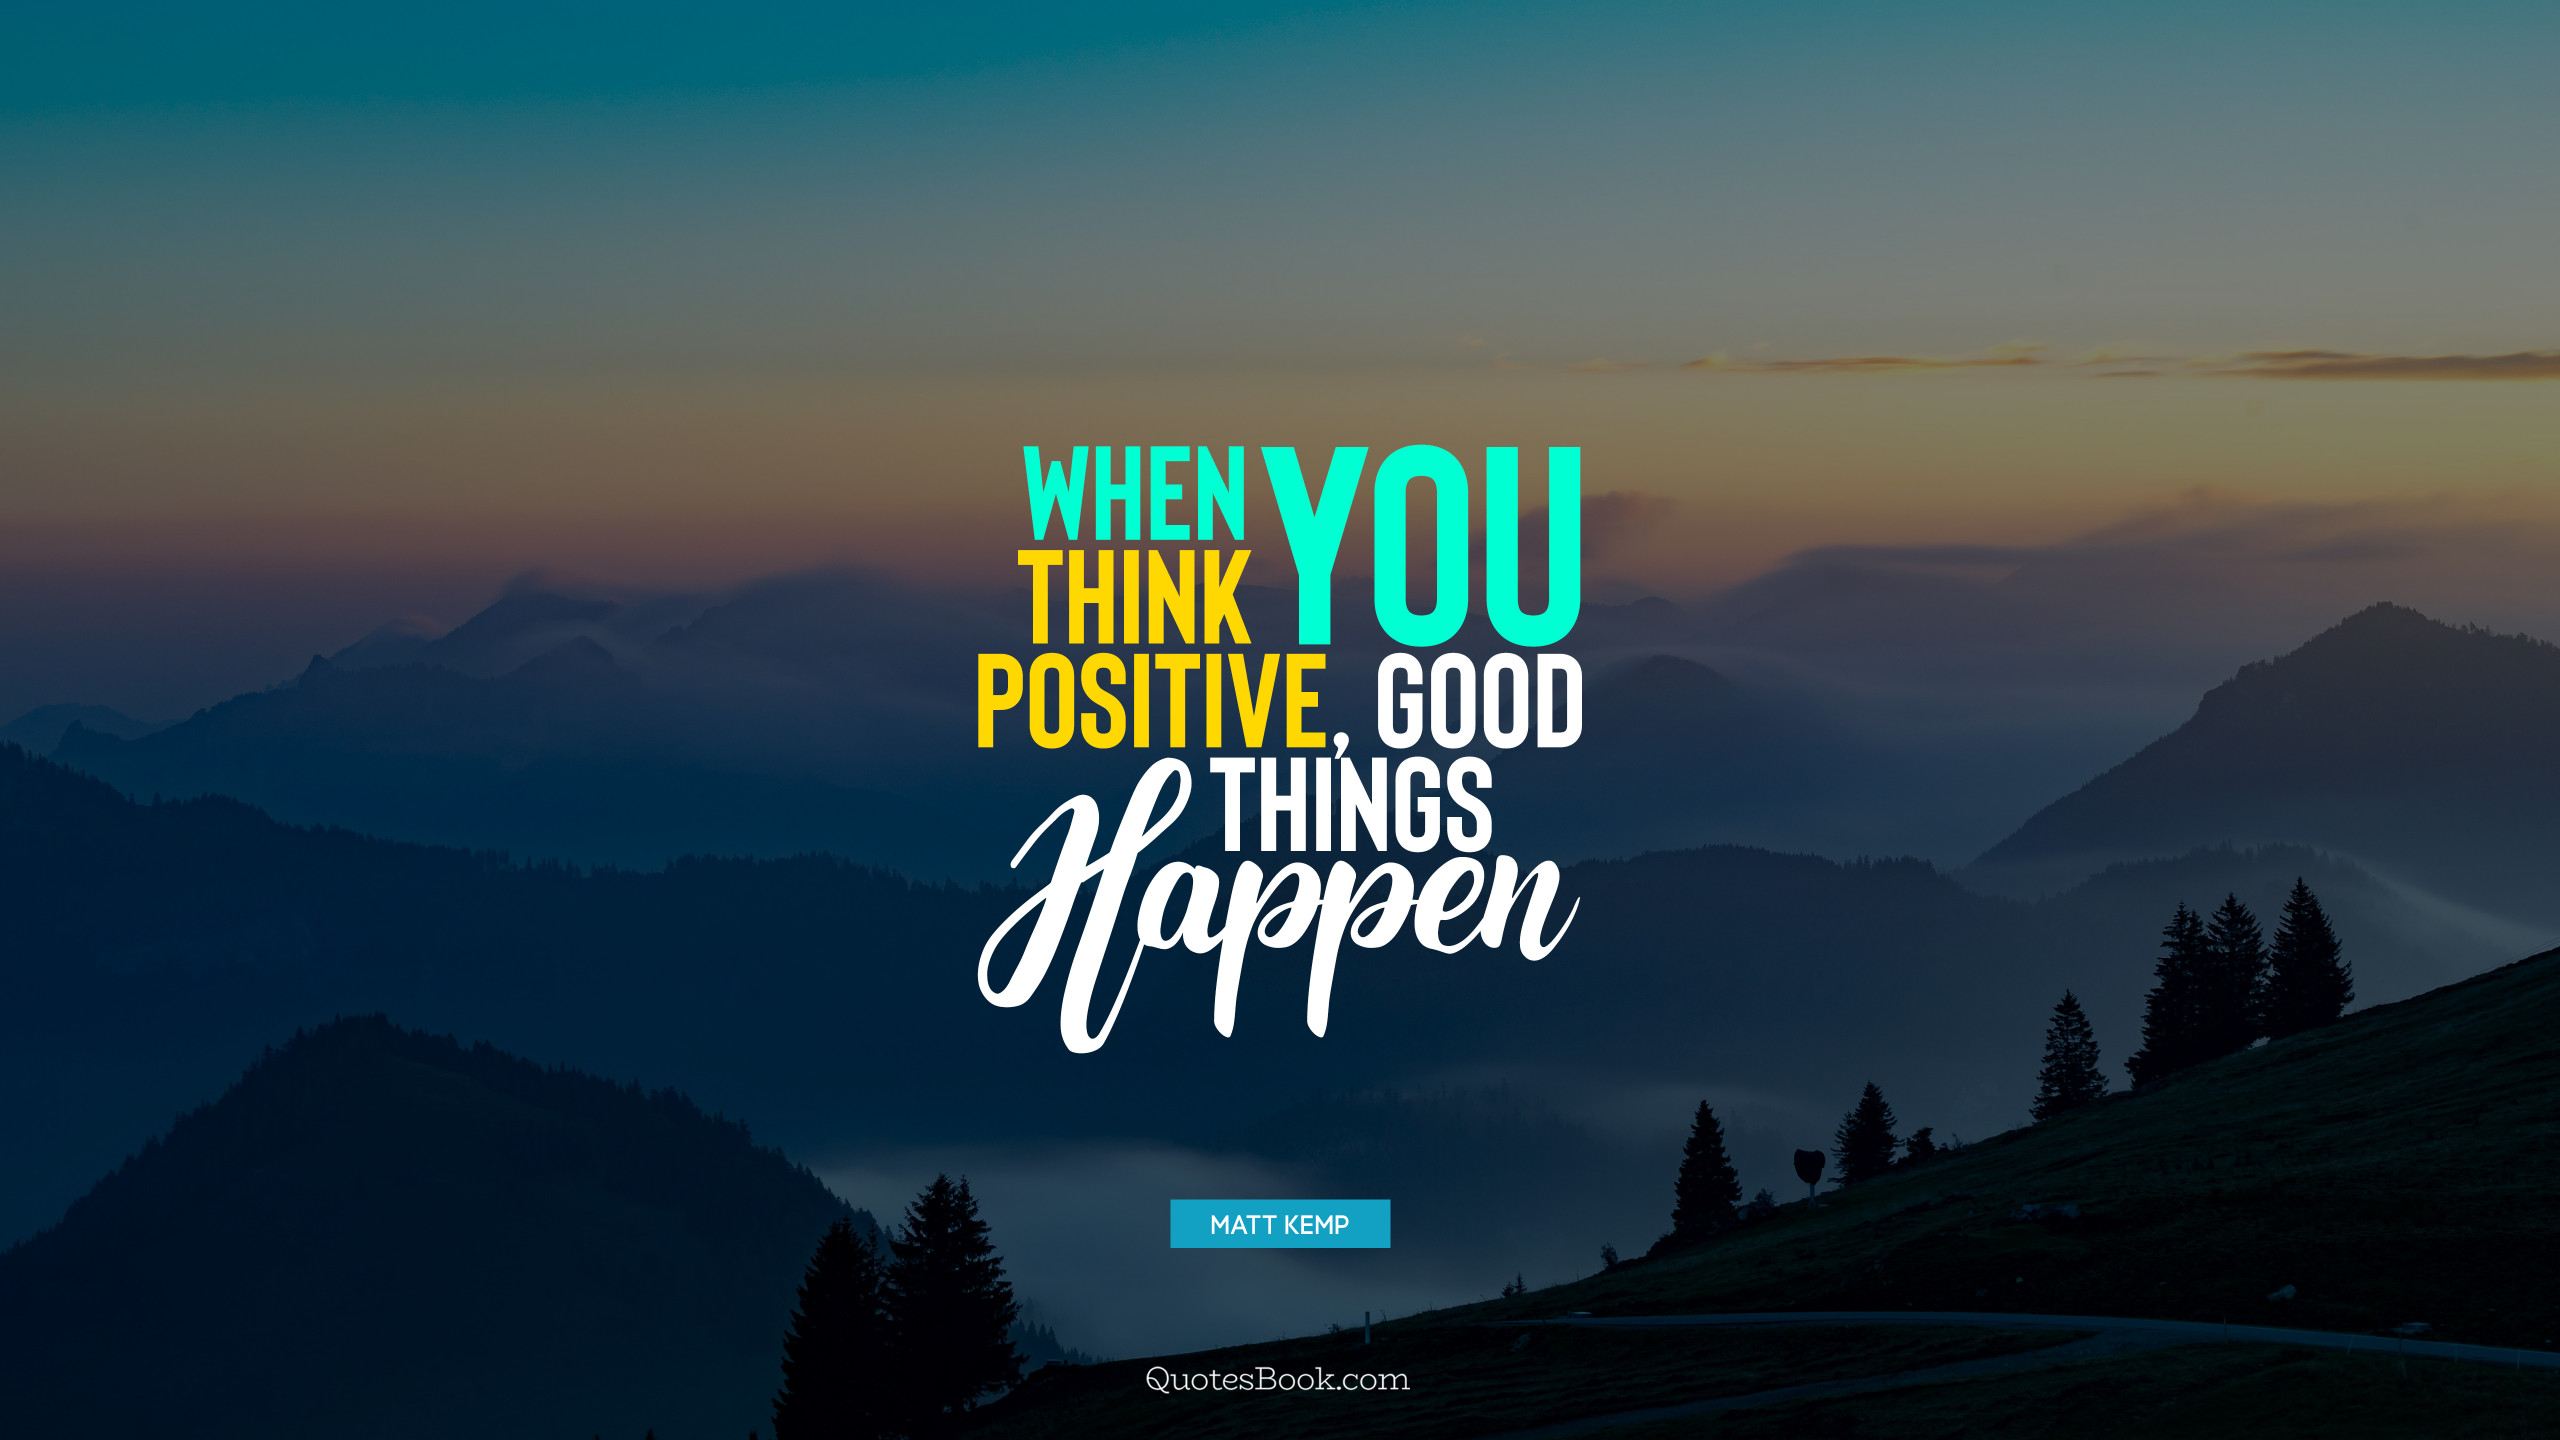 When you think positive, good things happen. Quote by